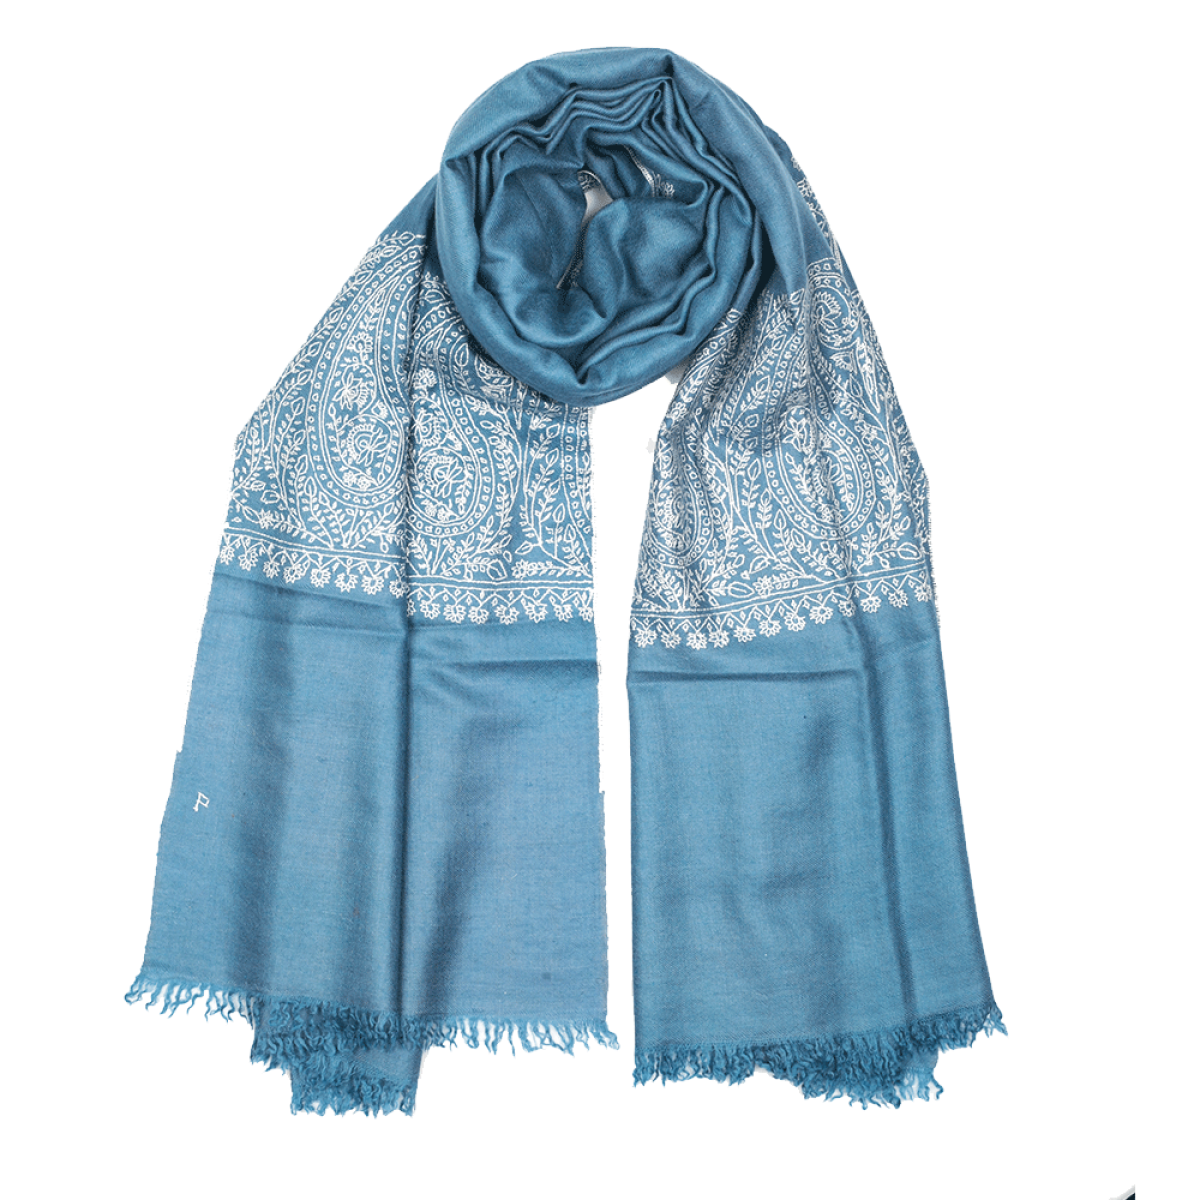 Embroidered Pashmina Stole - Frost Blue & White